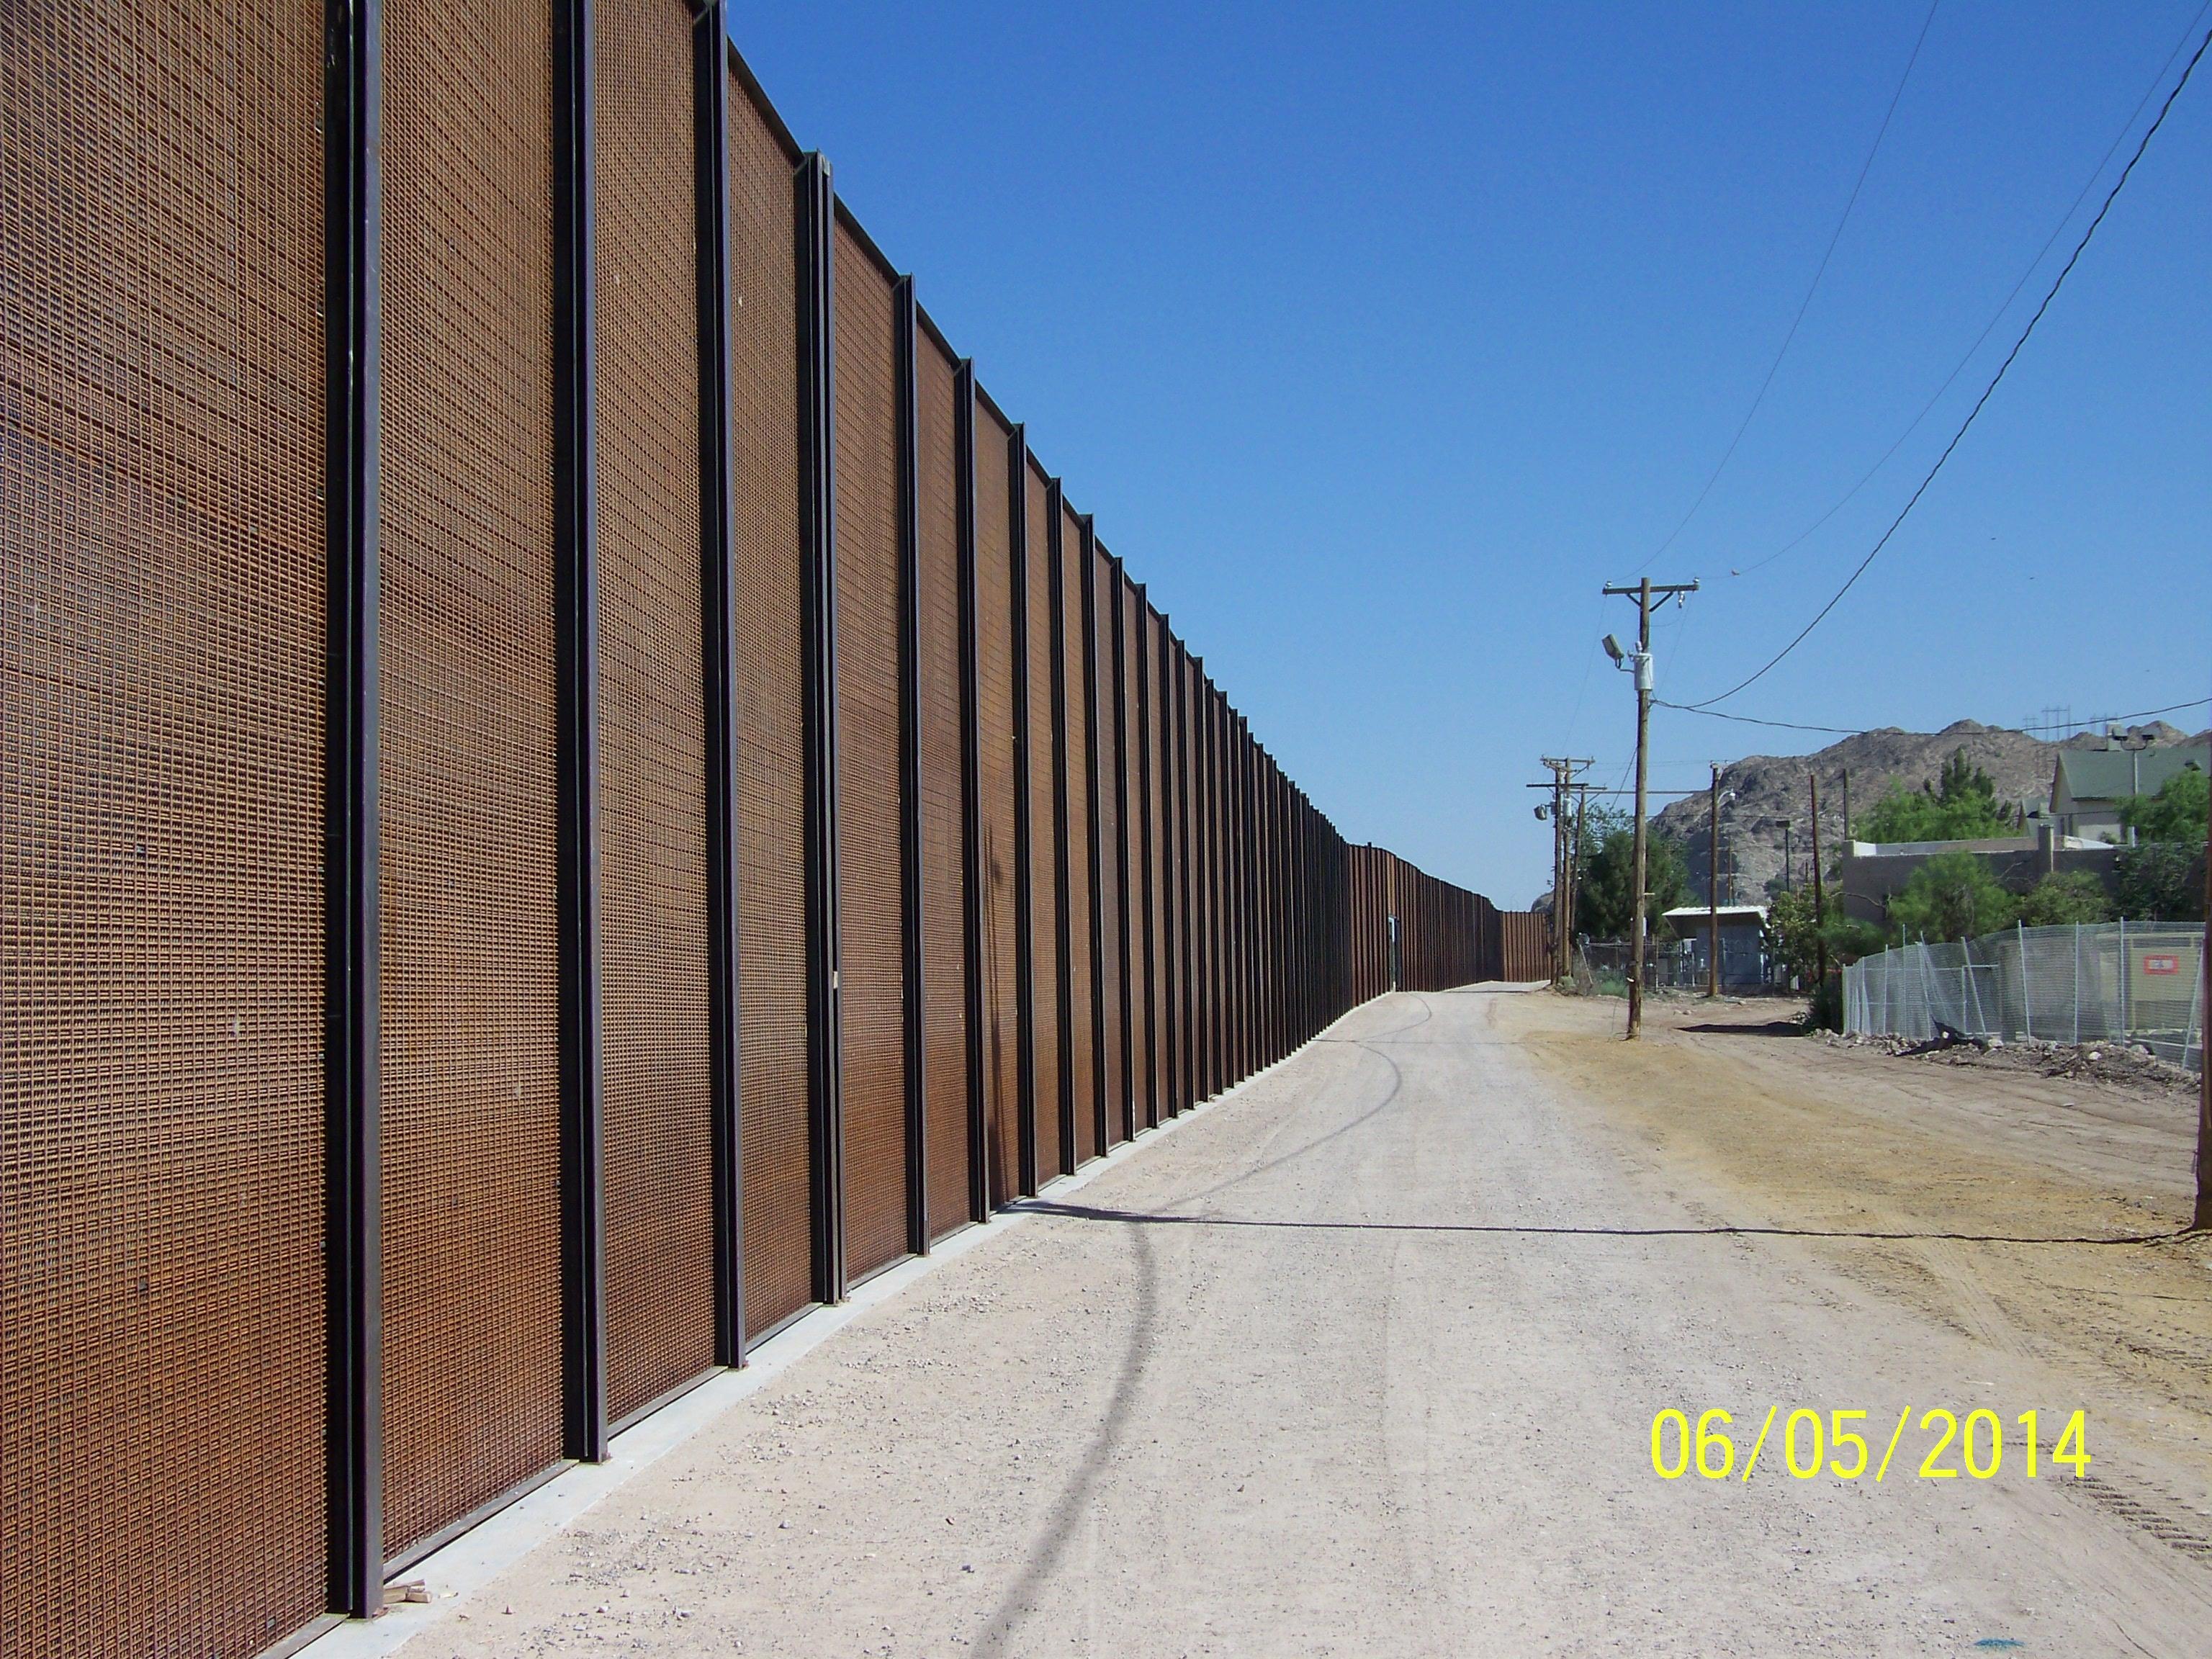 Existing Border Fence Map